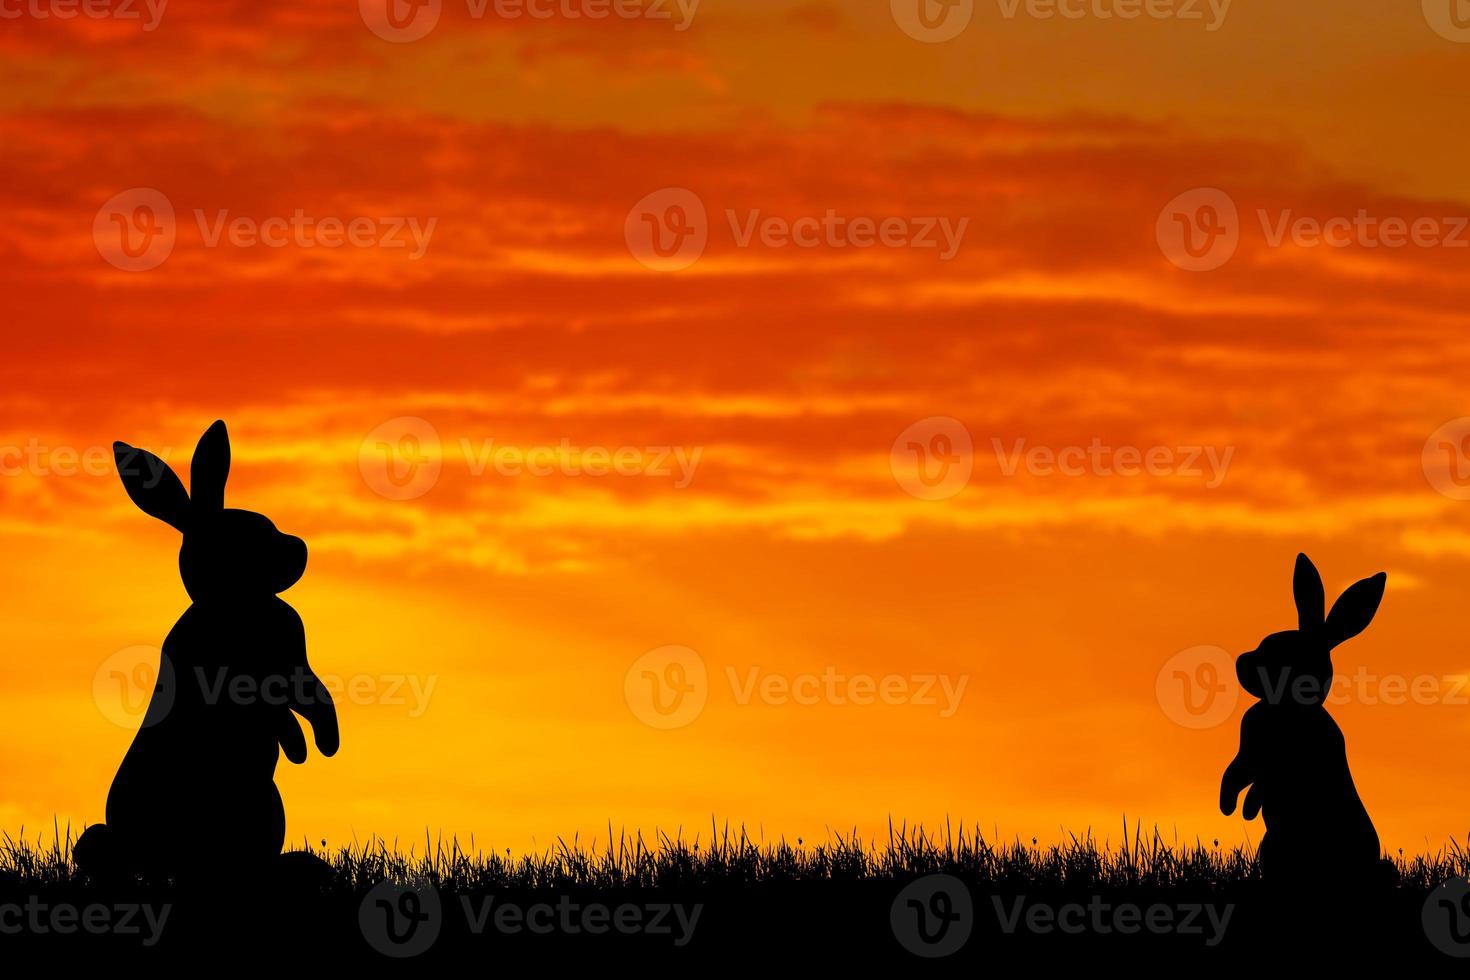 Rabbit silhouette in the meadow. The rabbit symbolizes the year 2023. photo